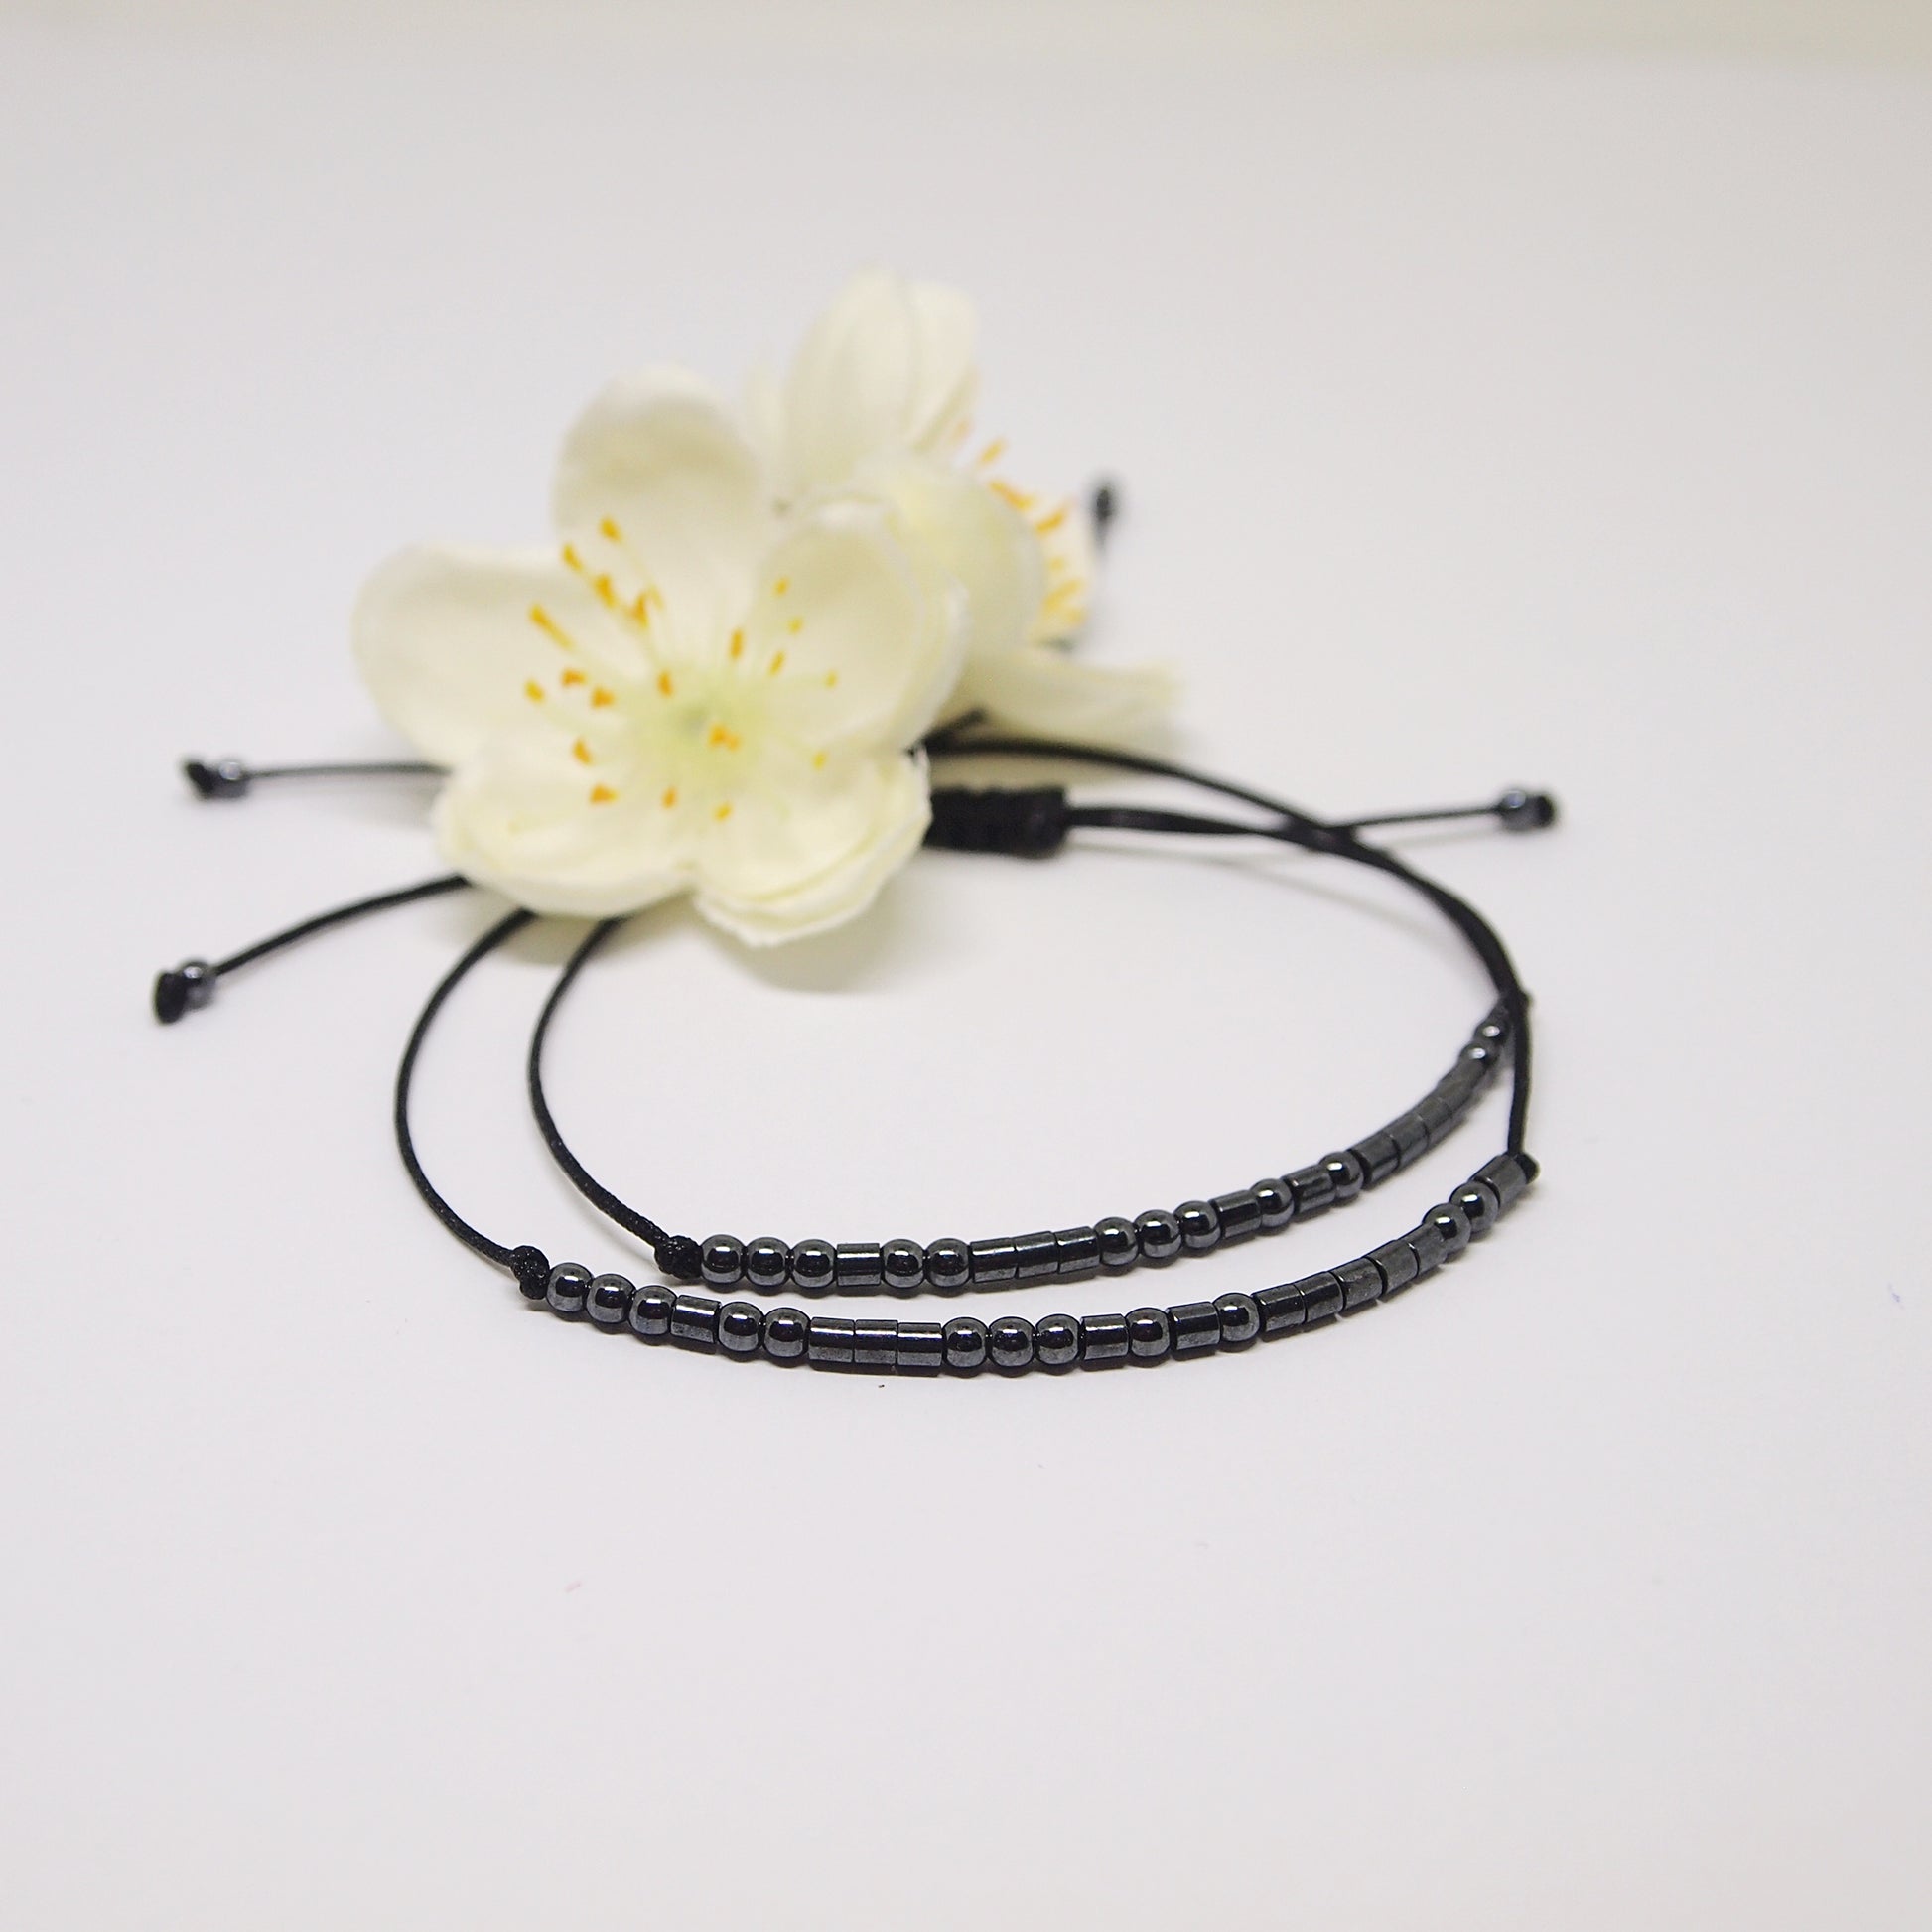 morse code bracelets with i love you , meaningful valentines day gift